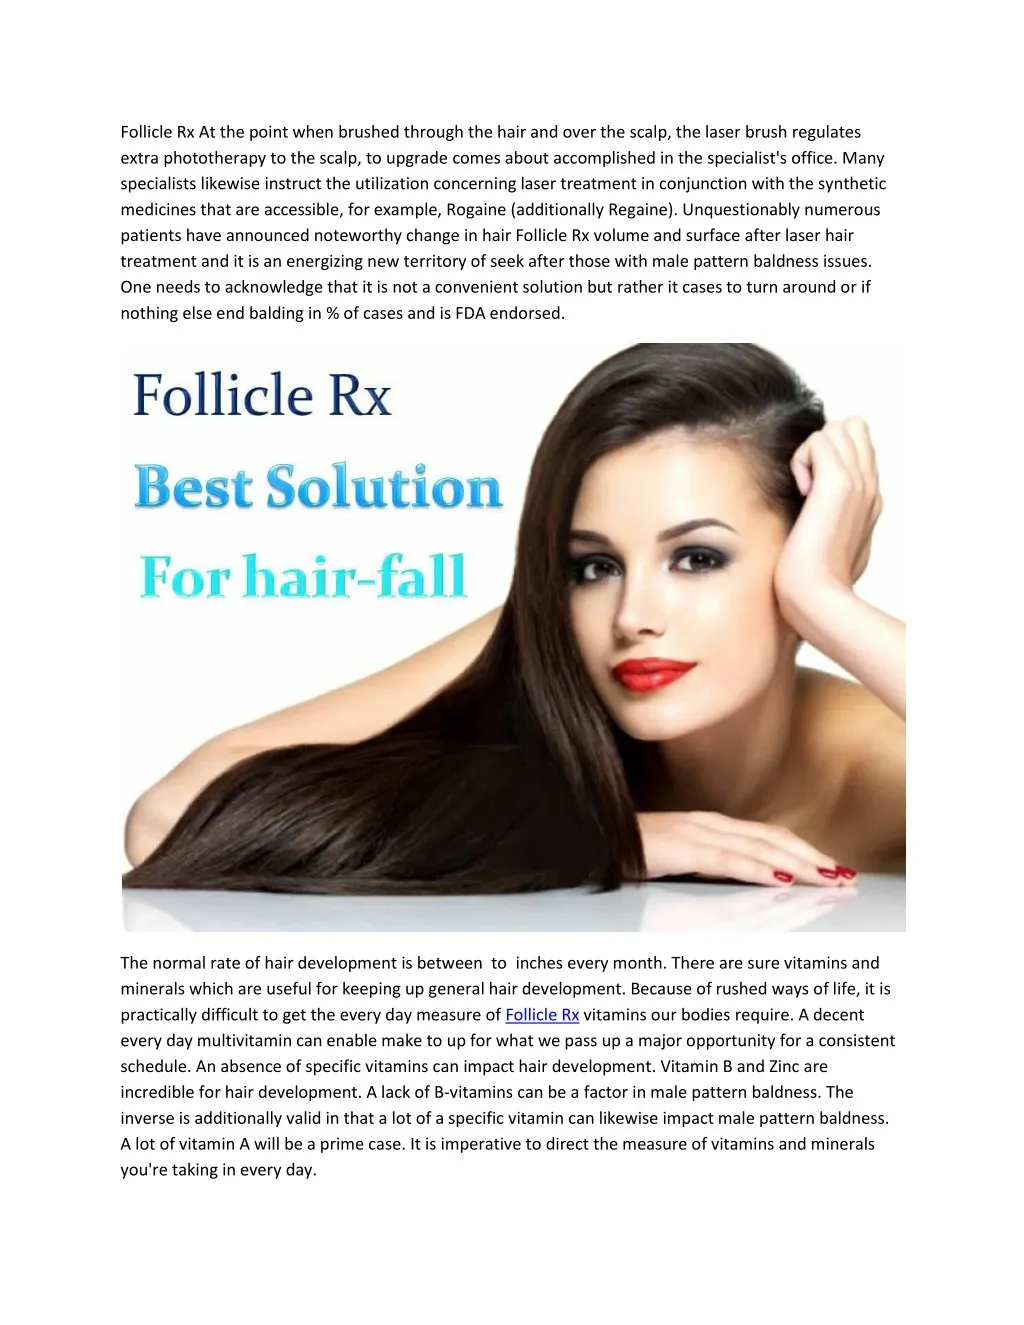 follicle rx at the point when brushed through